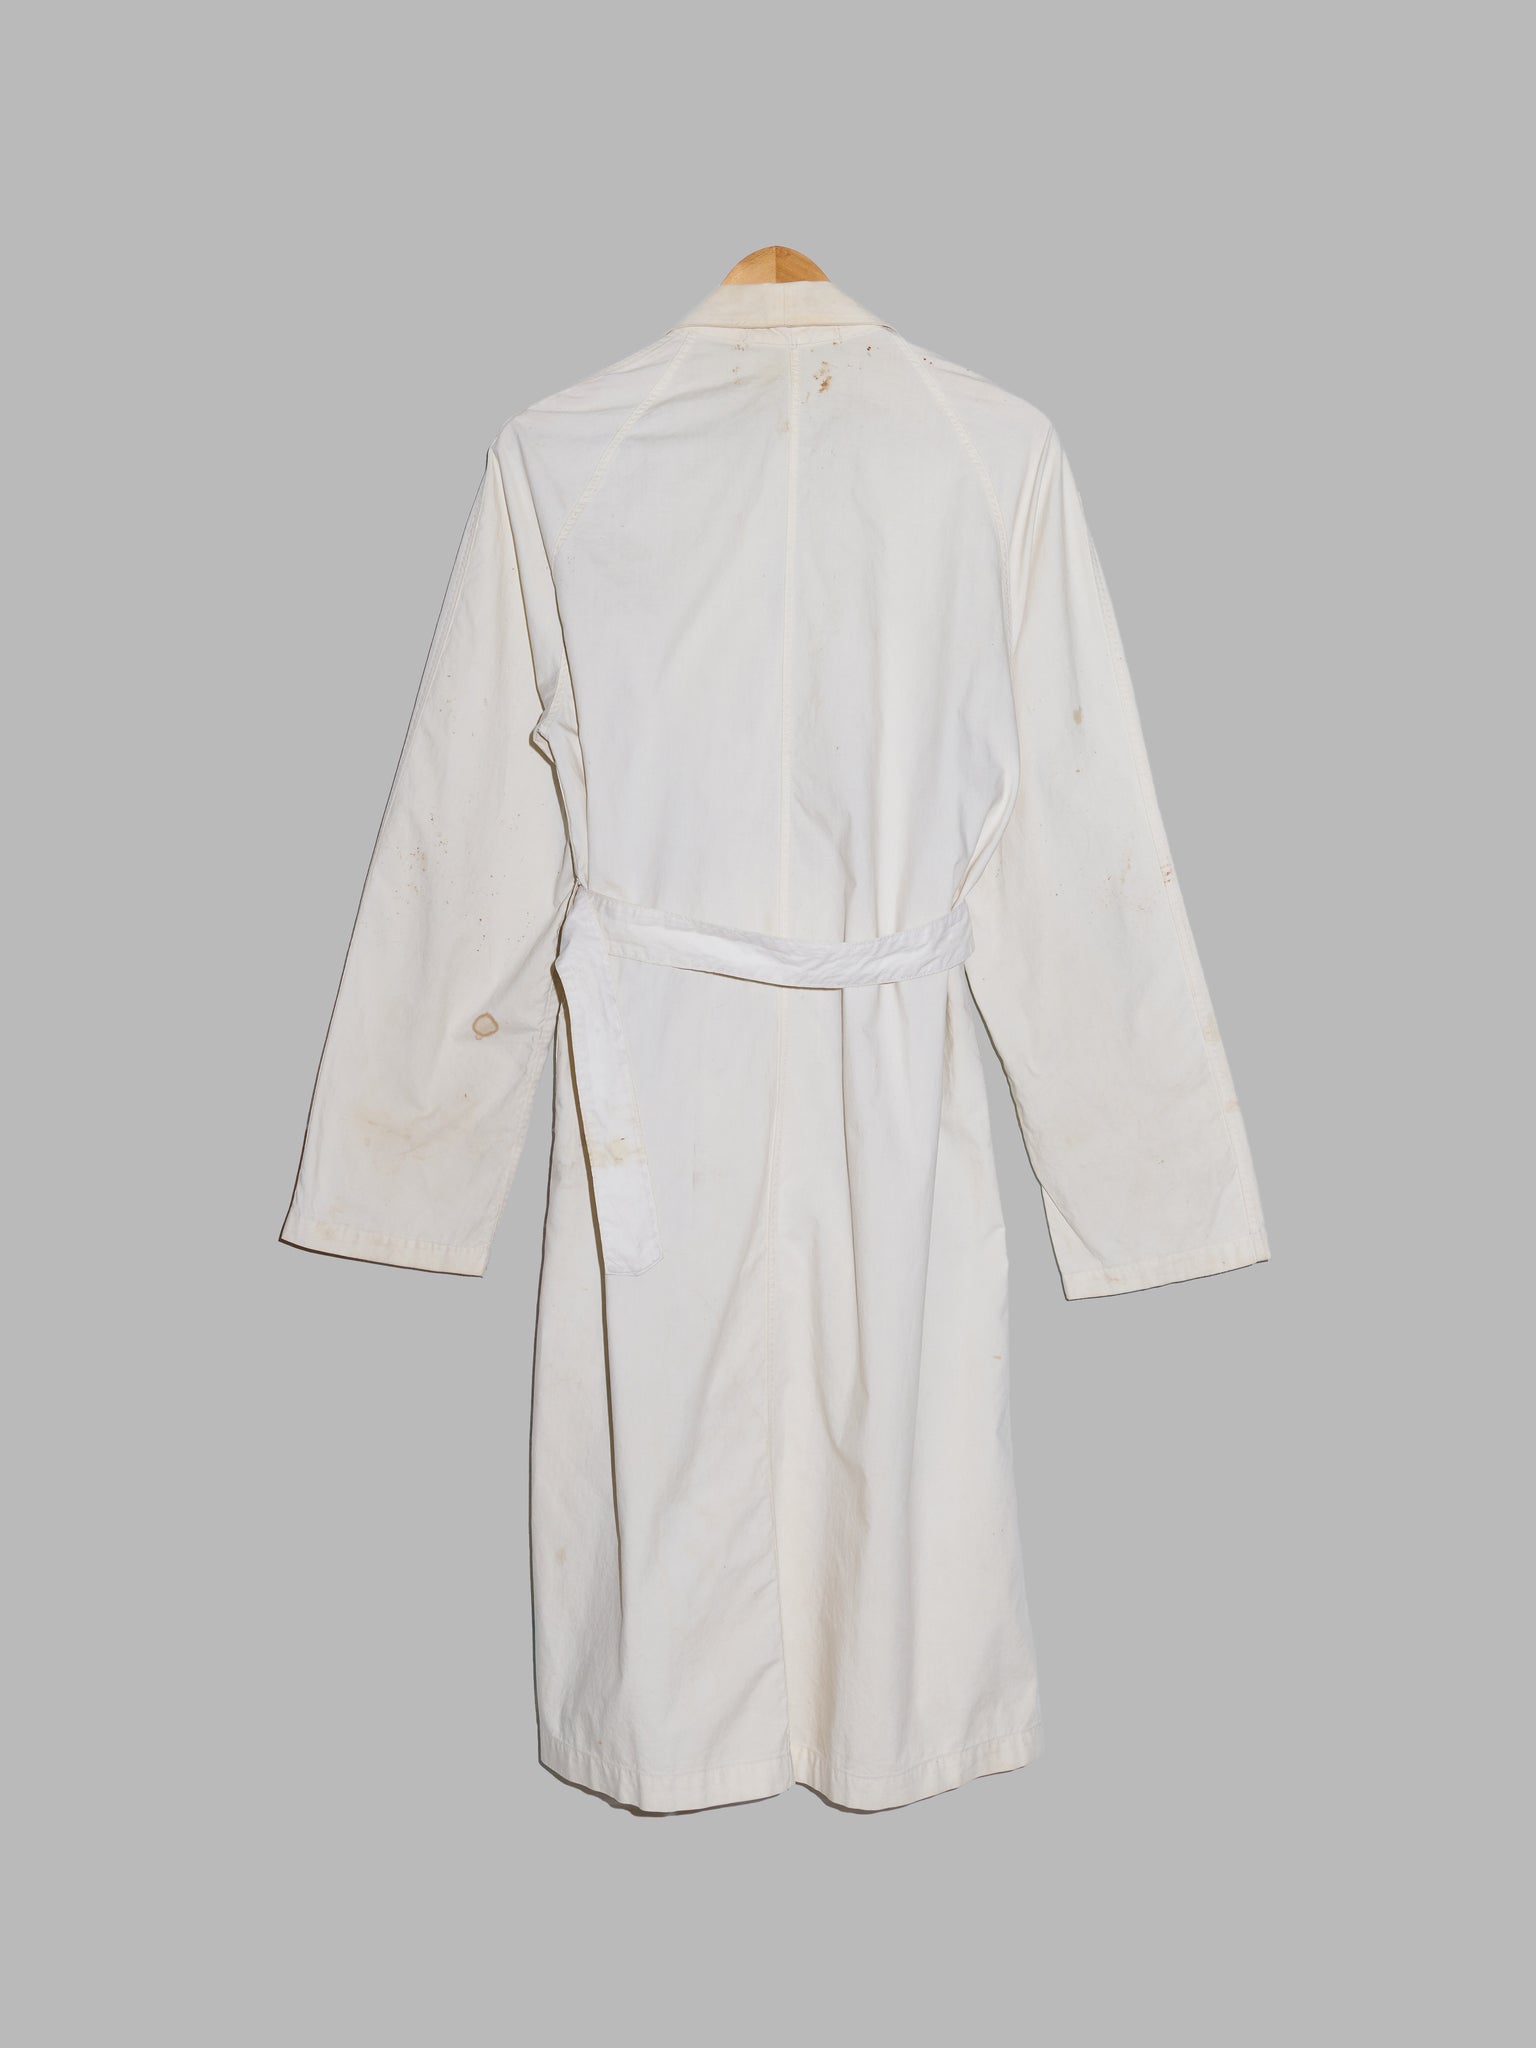 Vintage Sterling Roadknight off white cotton 3 button lab coat